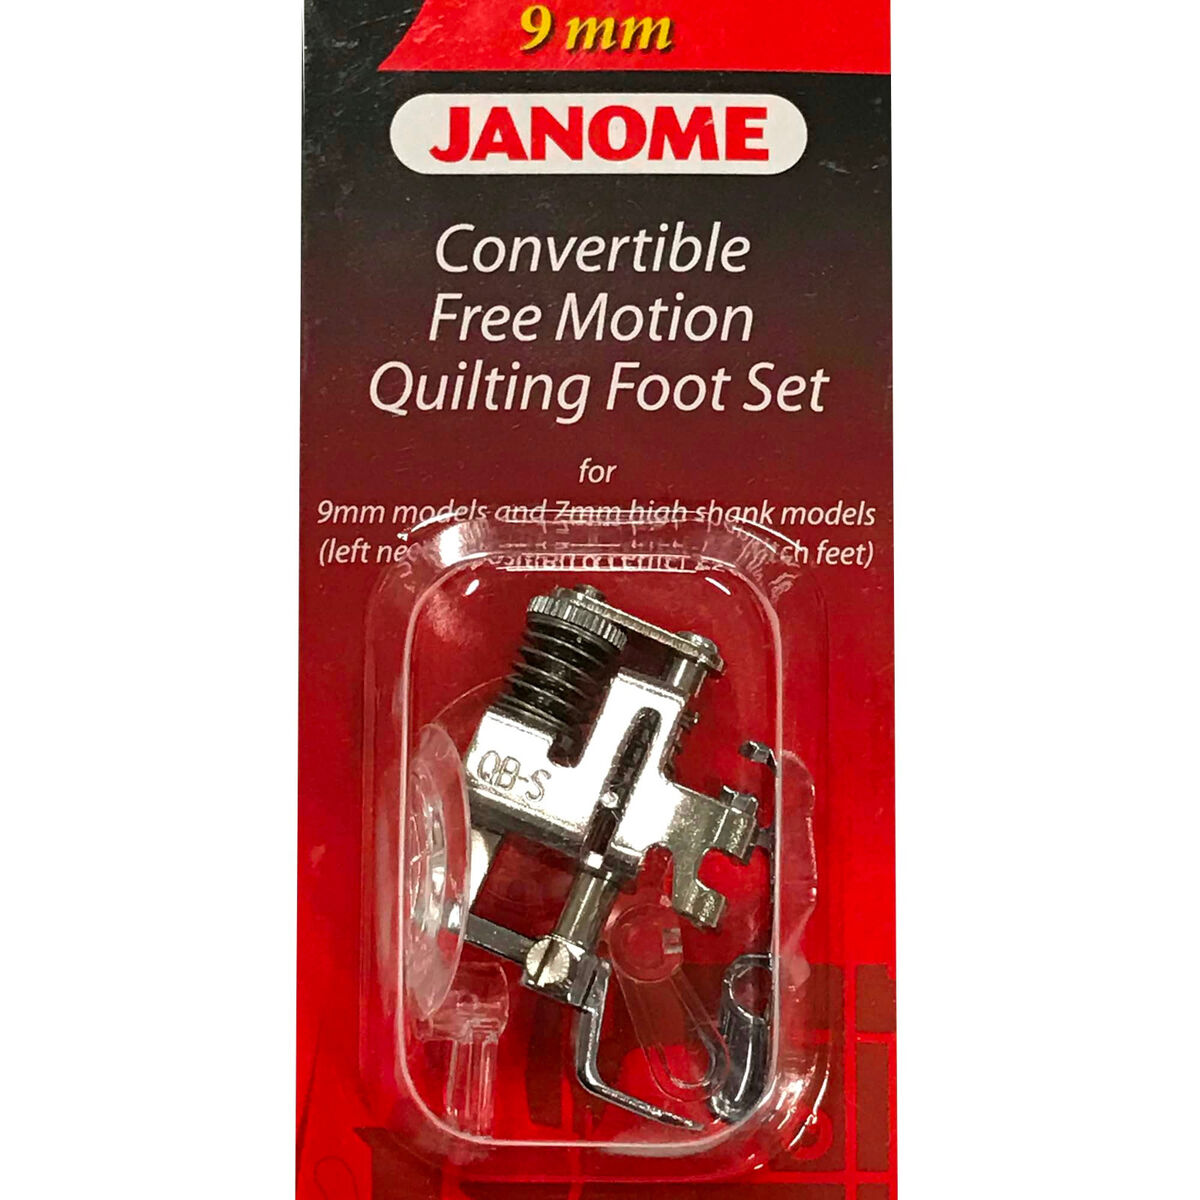 Janome Convertible Free Motion Quilting Foot Set Cat D